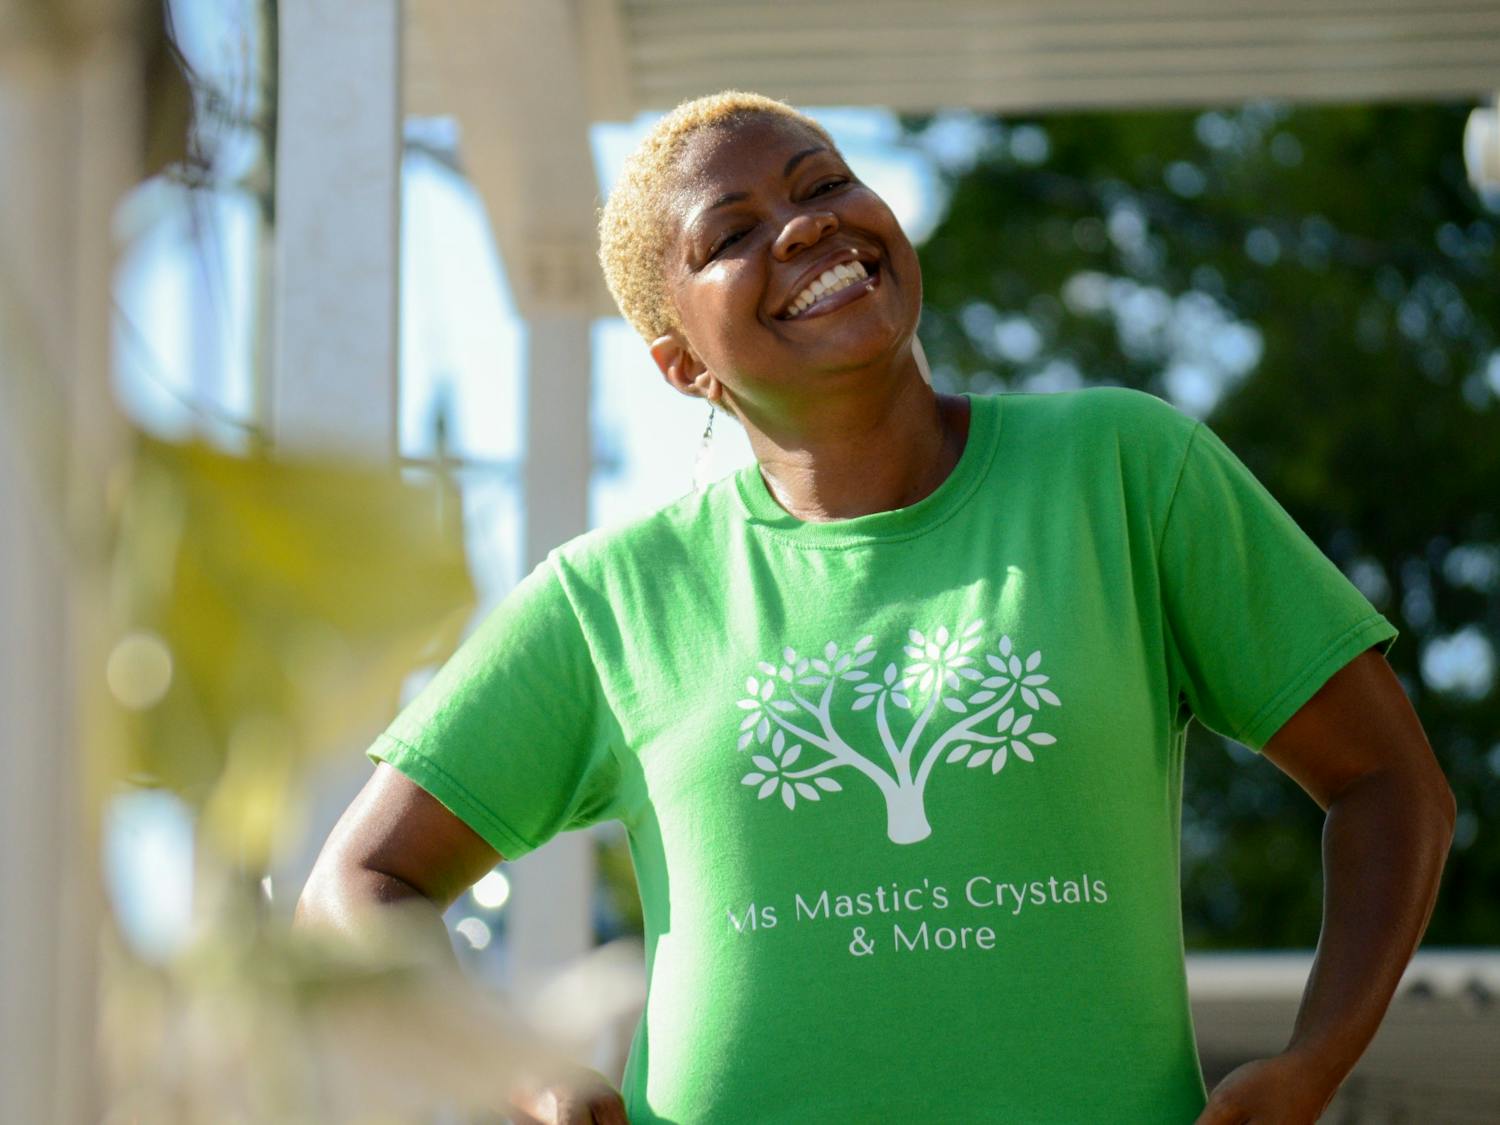 Loretha Johnson, the owner of Ms. Mastic's Crystals &amp; More, stands outside Midway Market on Aug. 8, 2022. Johnson began her business at pop up shops hosted at Midway Market.